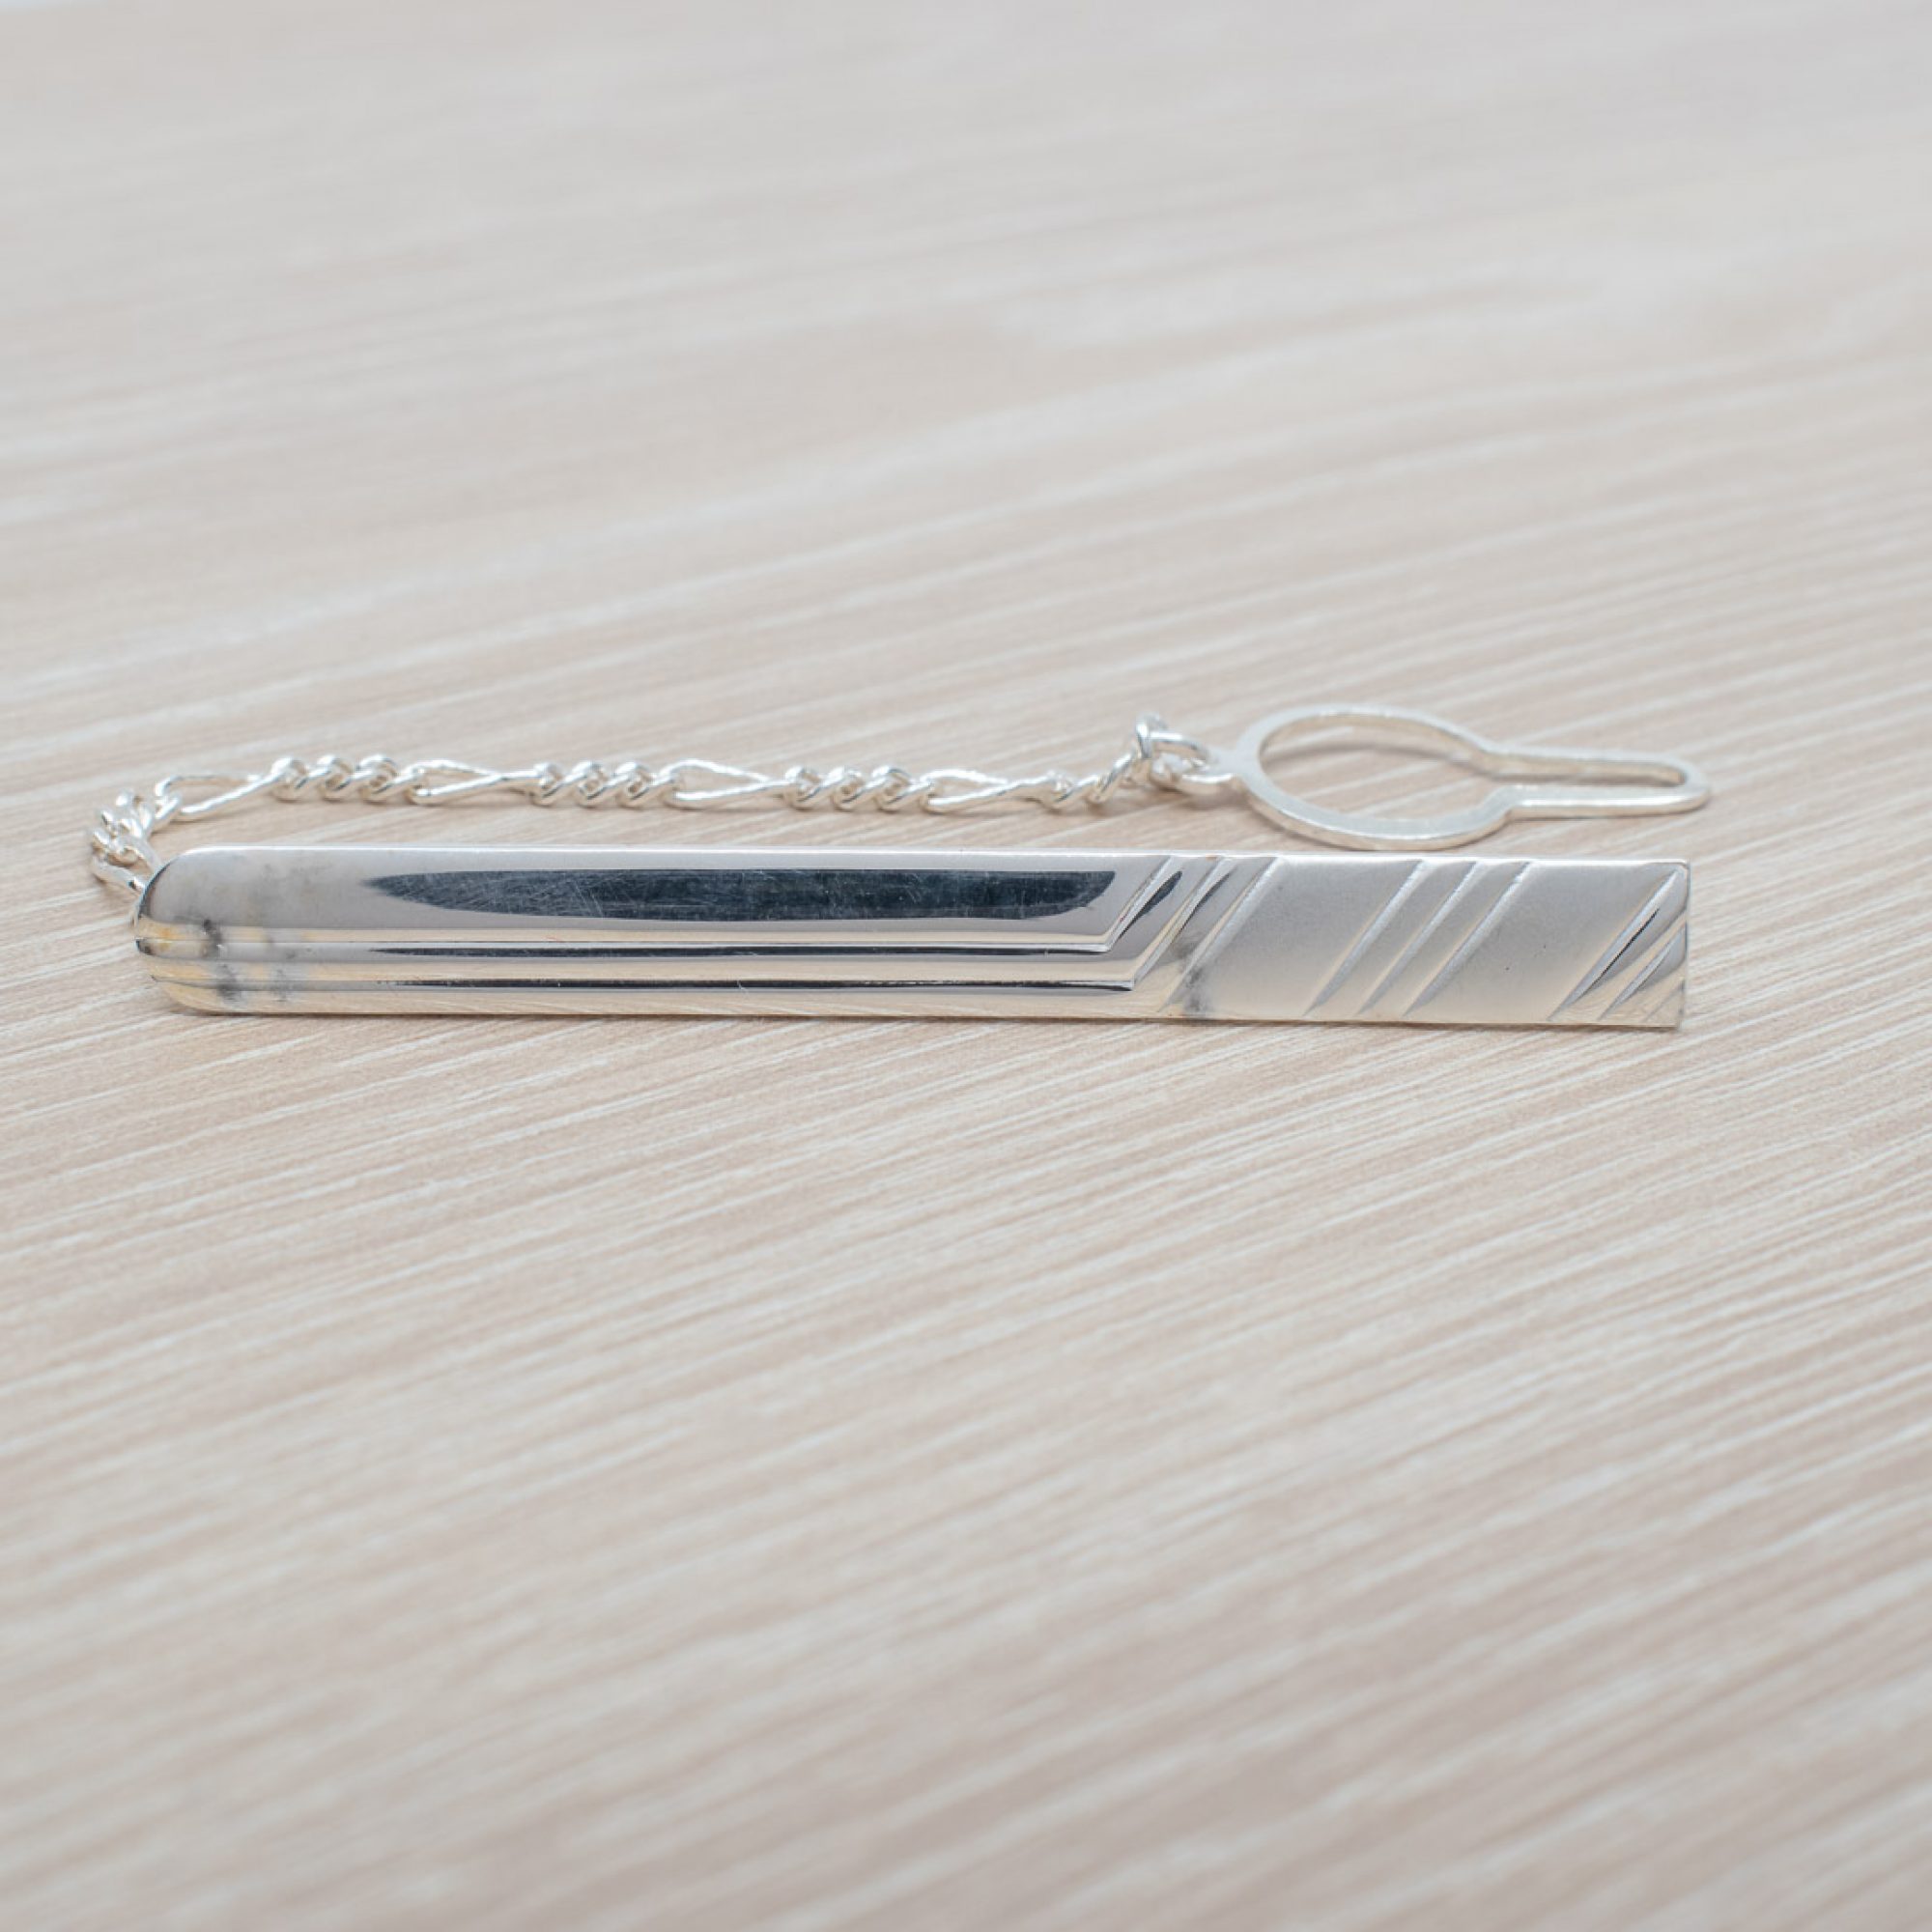 Silver tie bar with chain